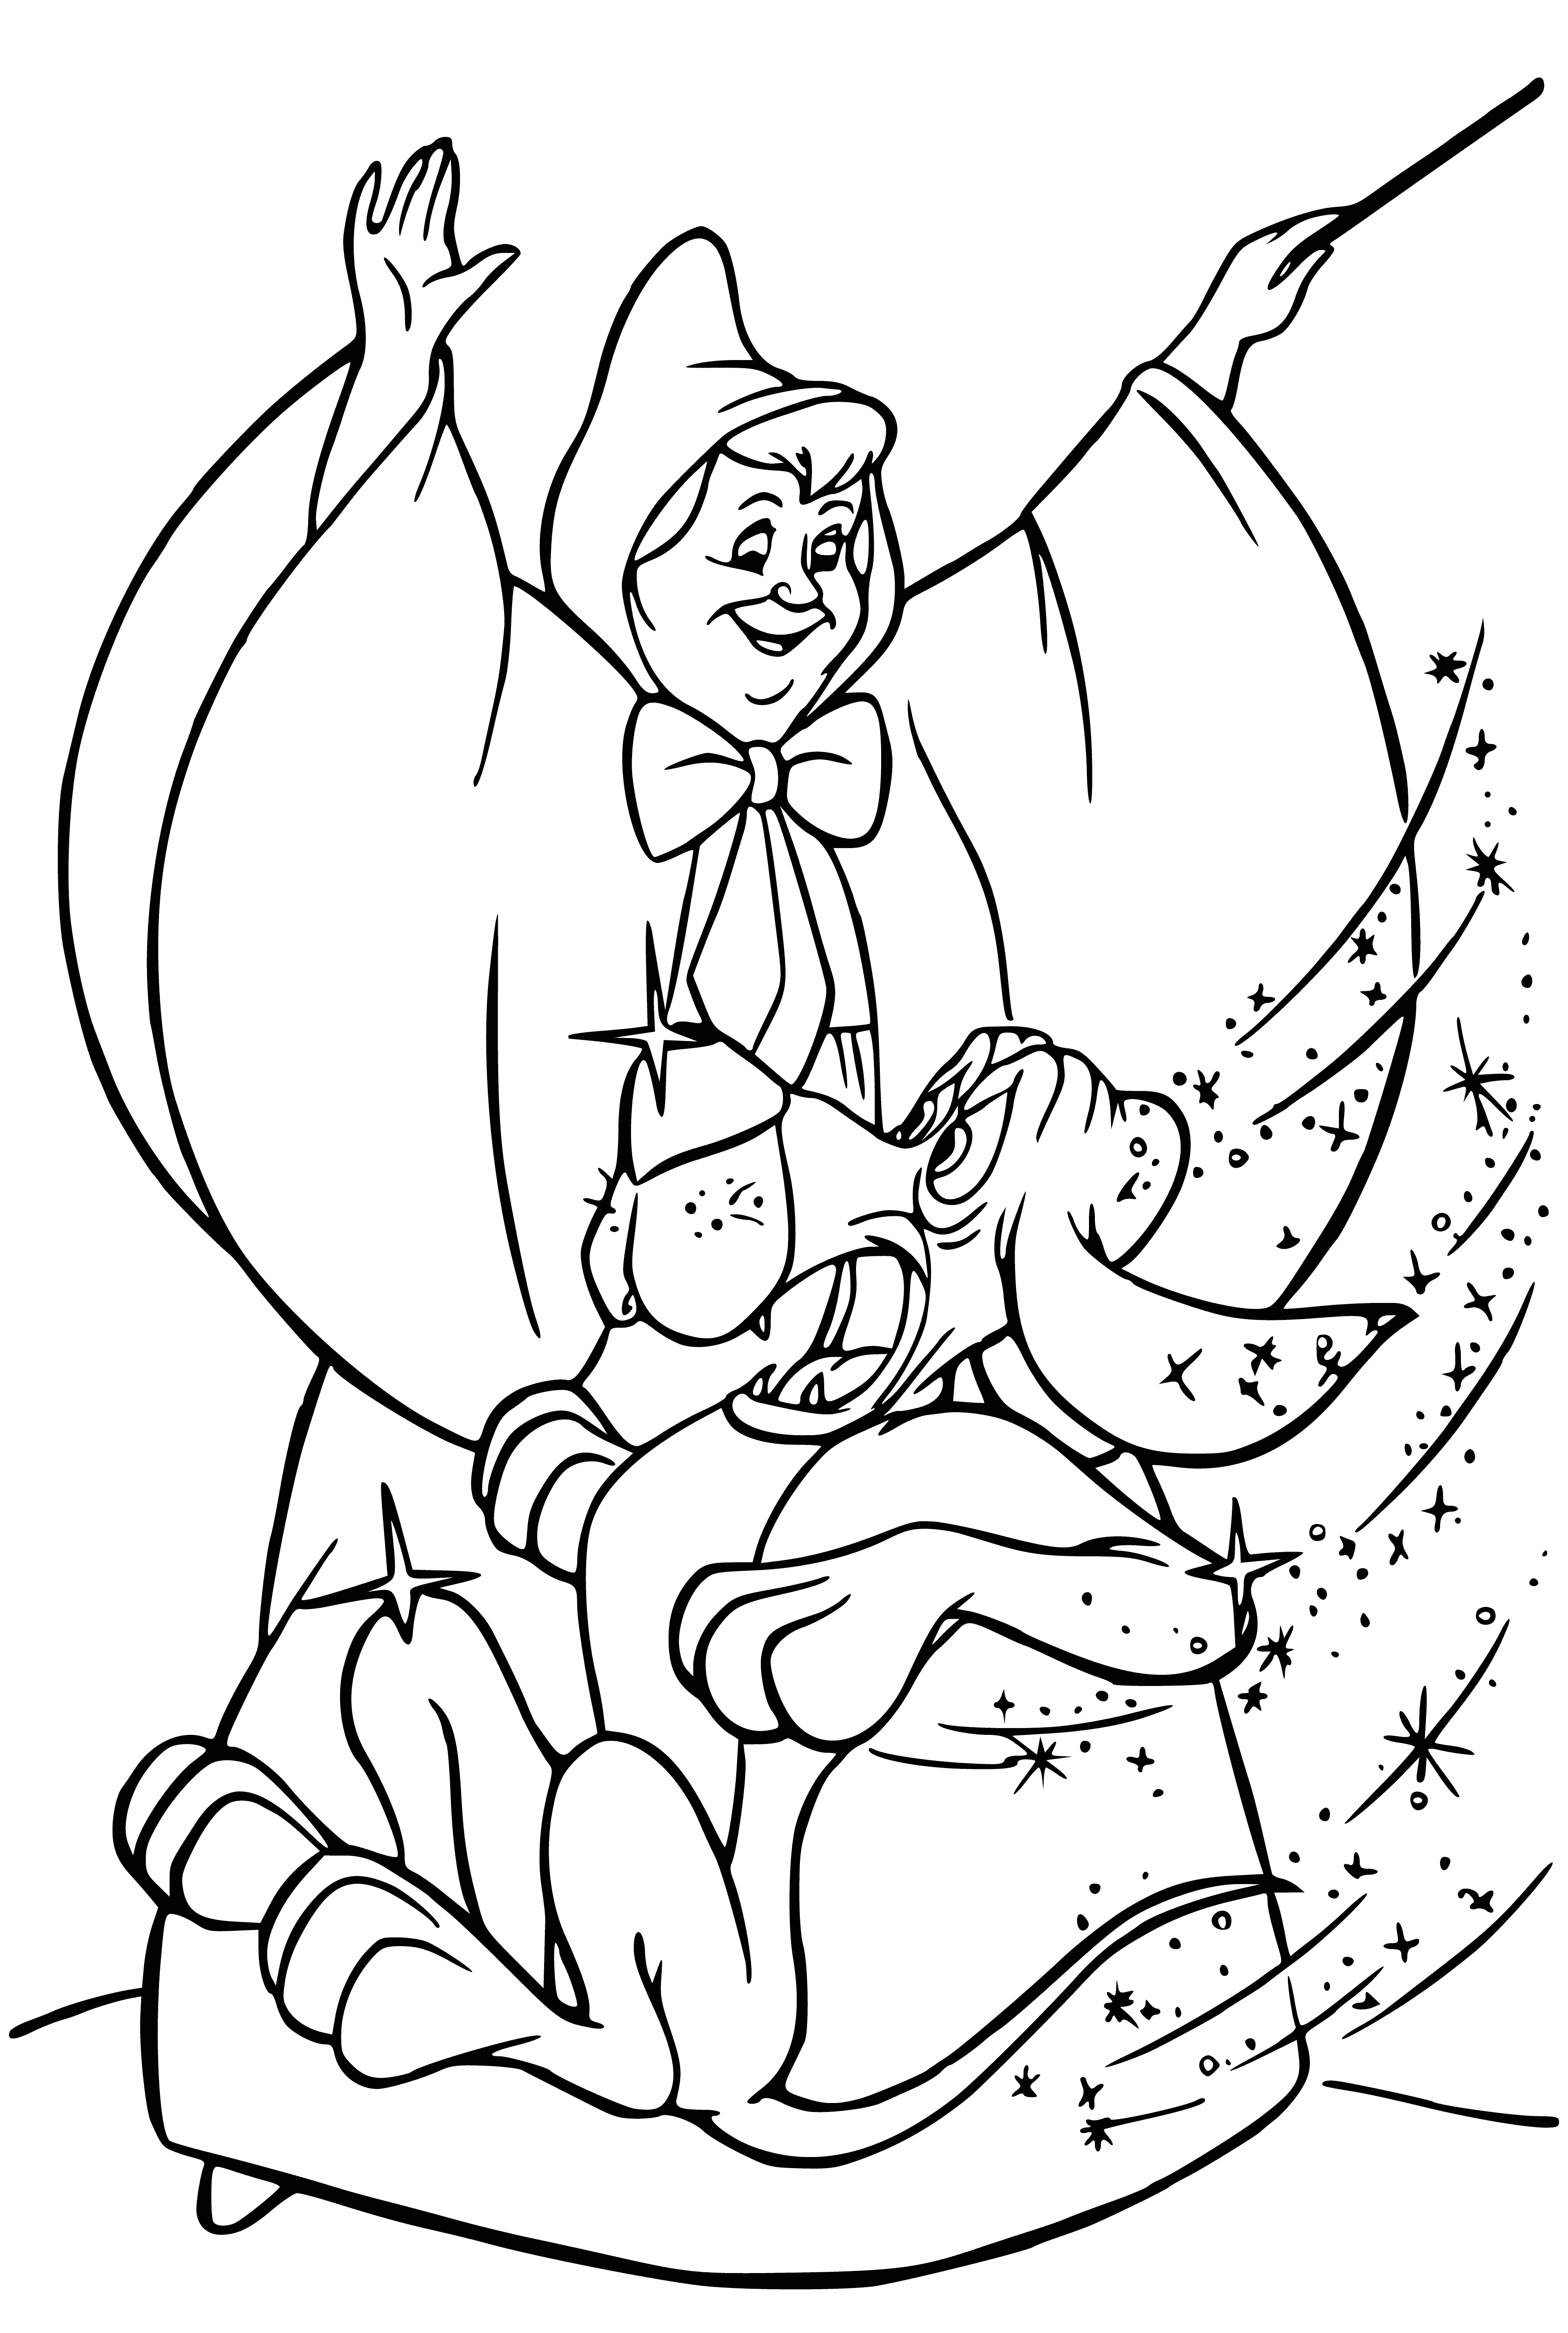 Old dog ... coloring page